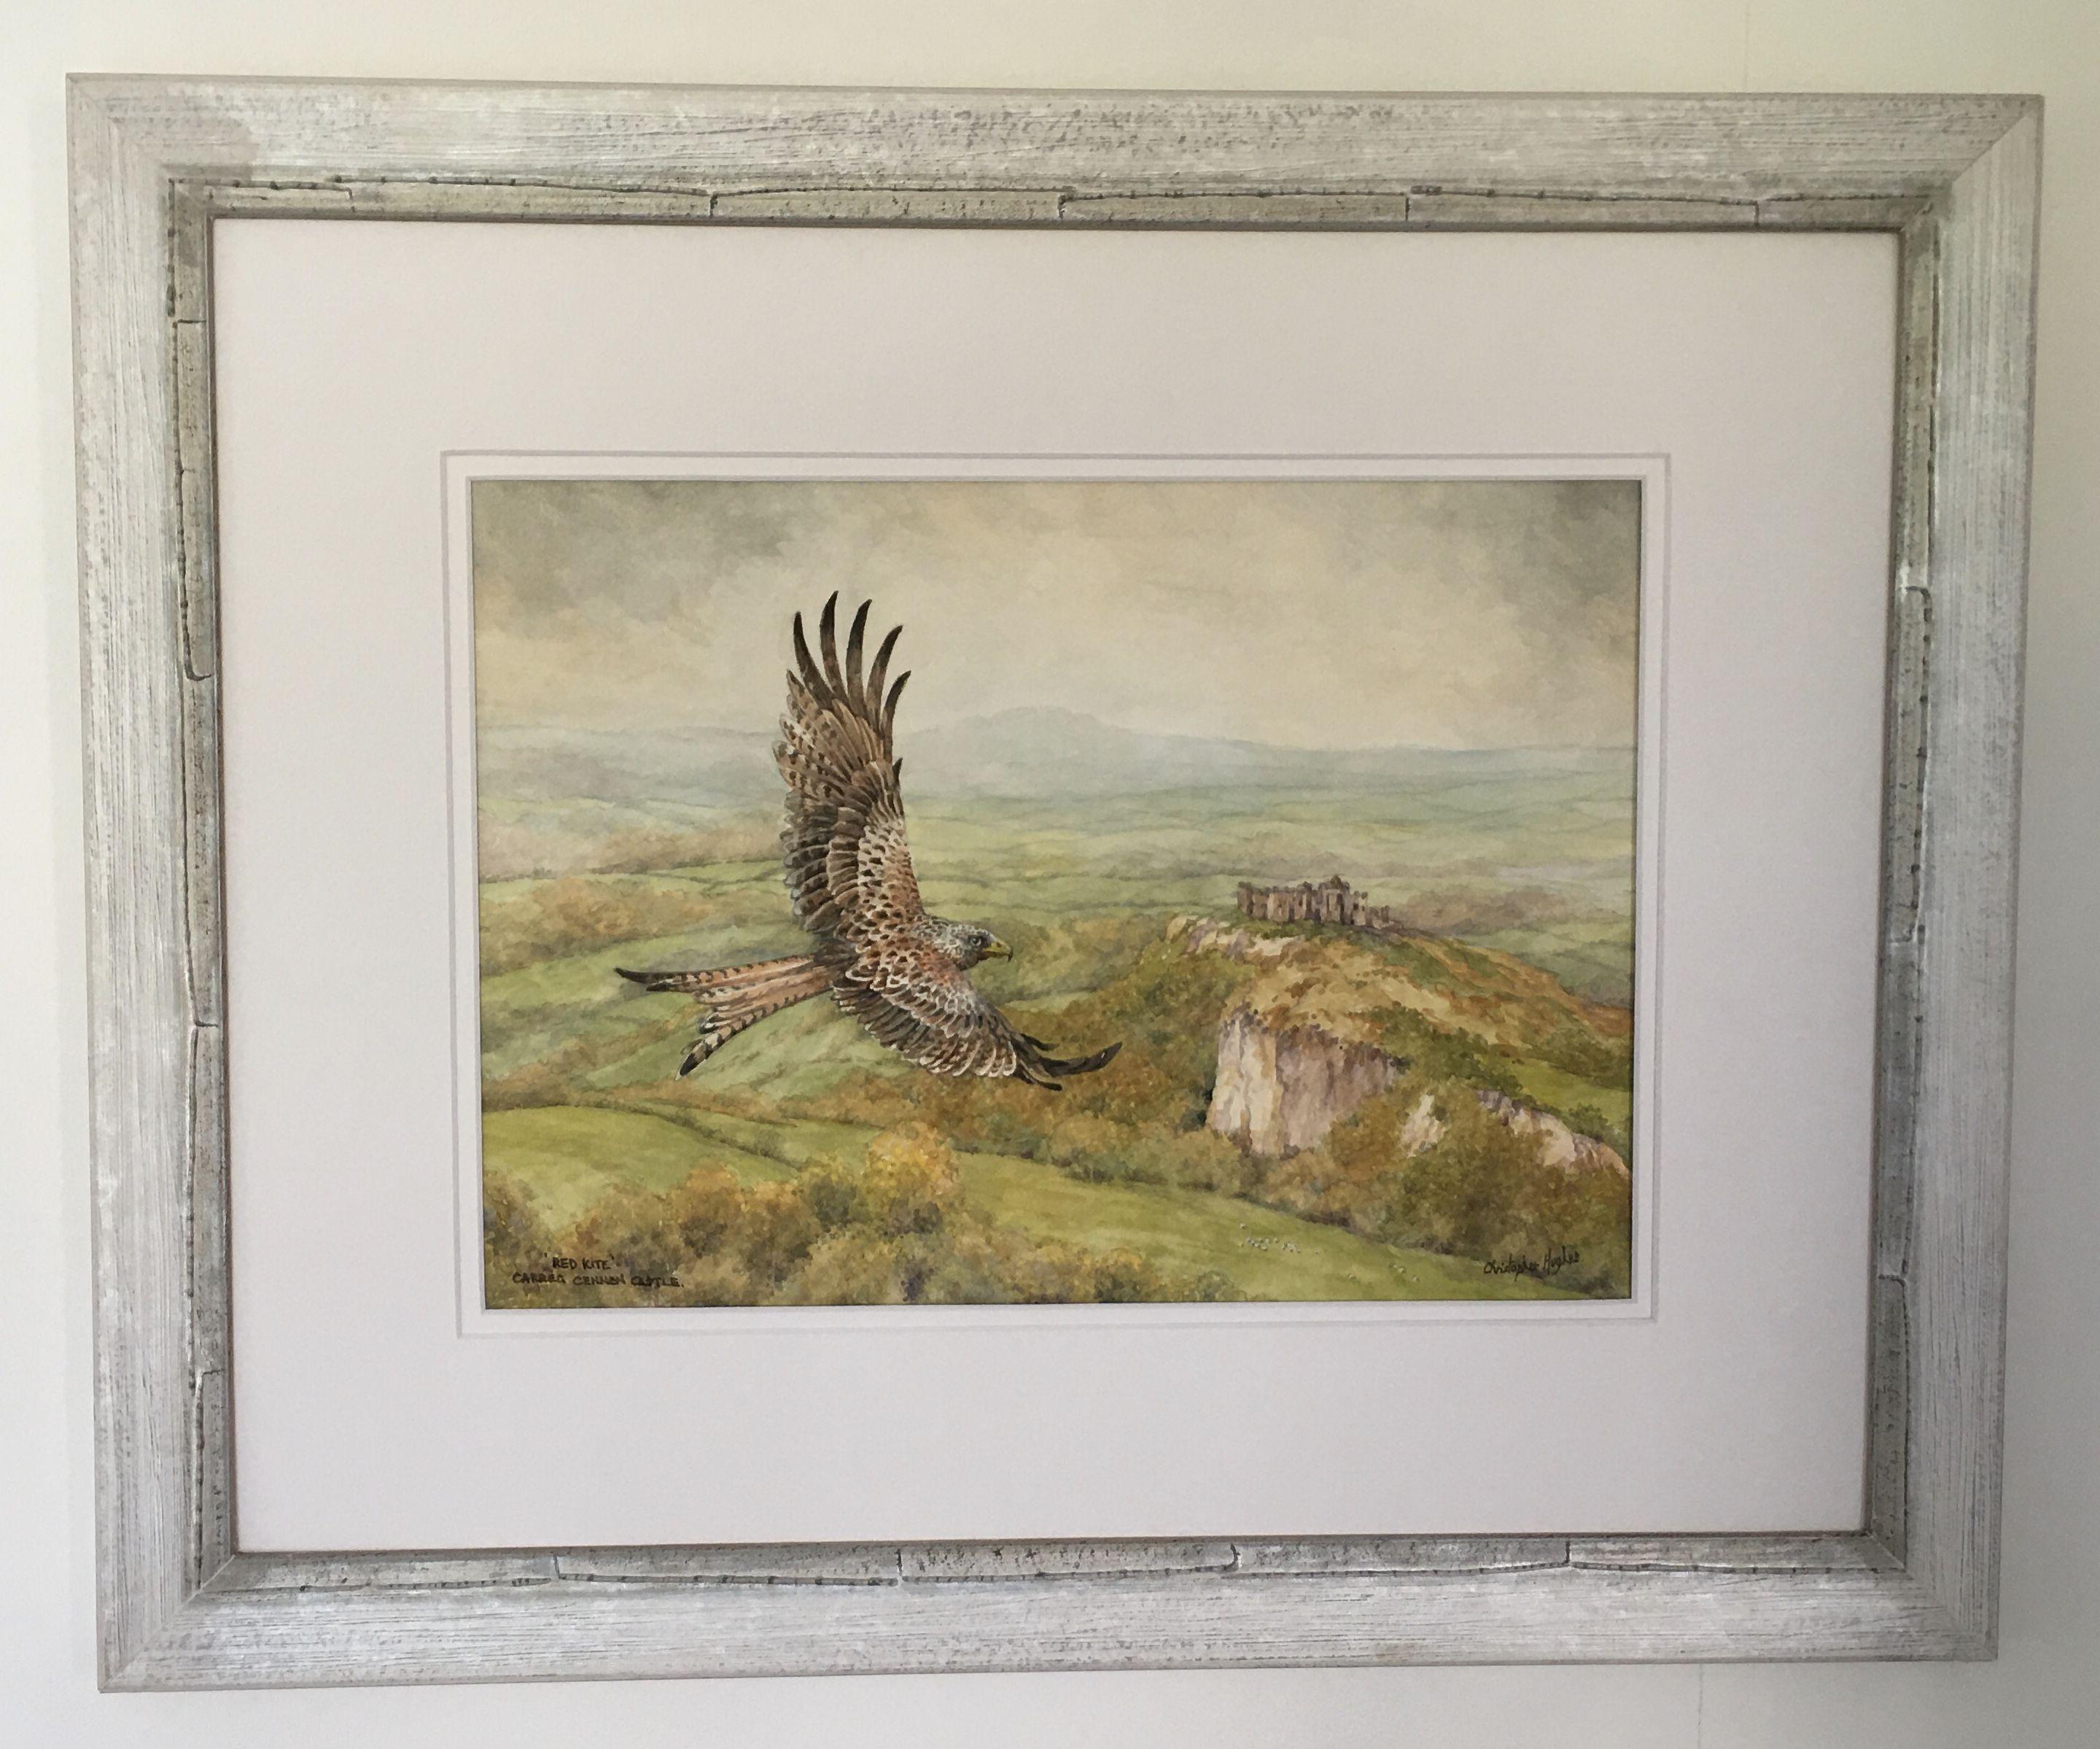 Red Kite . Carreg Cennen .Wales, Painting, Watercolor on Watercolor Paper - Realist Art by Christopher Hughes